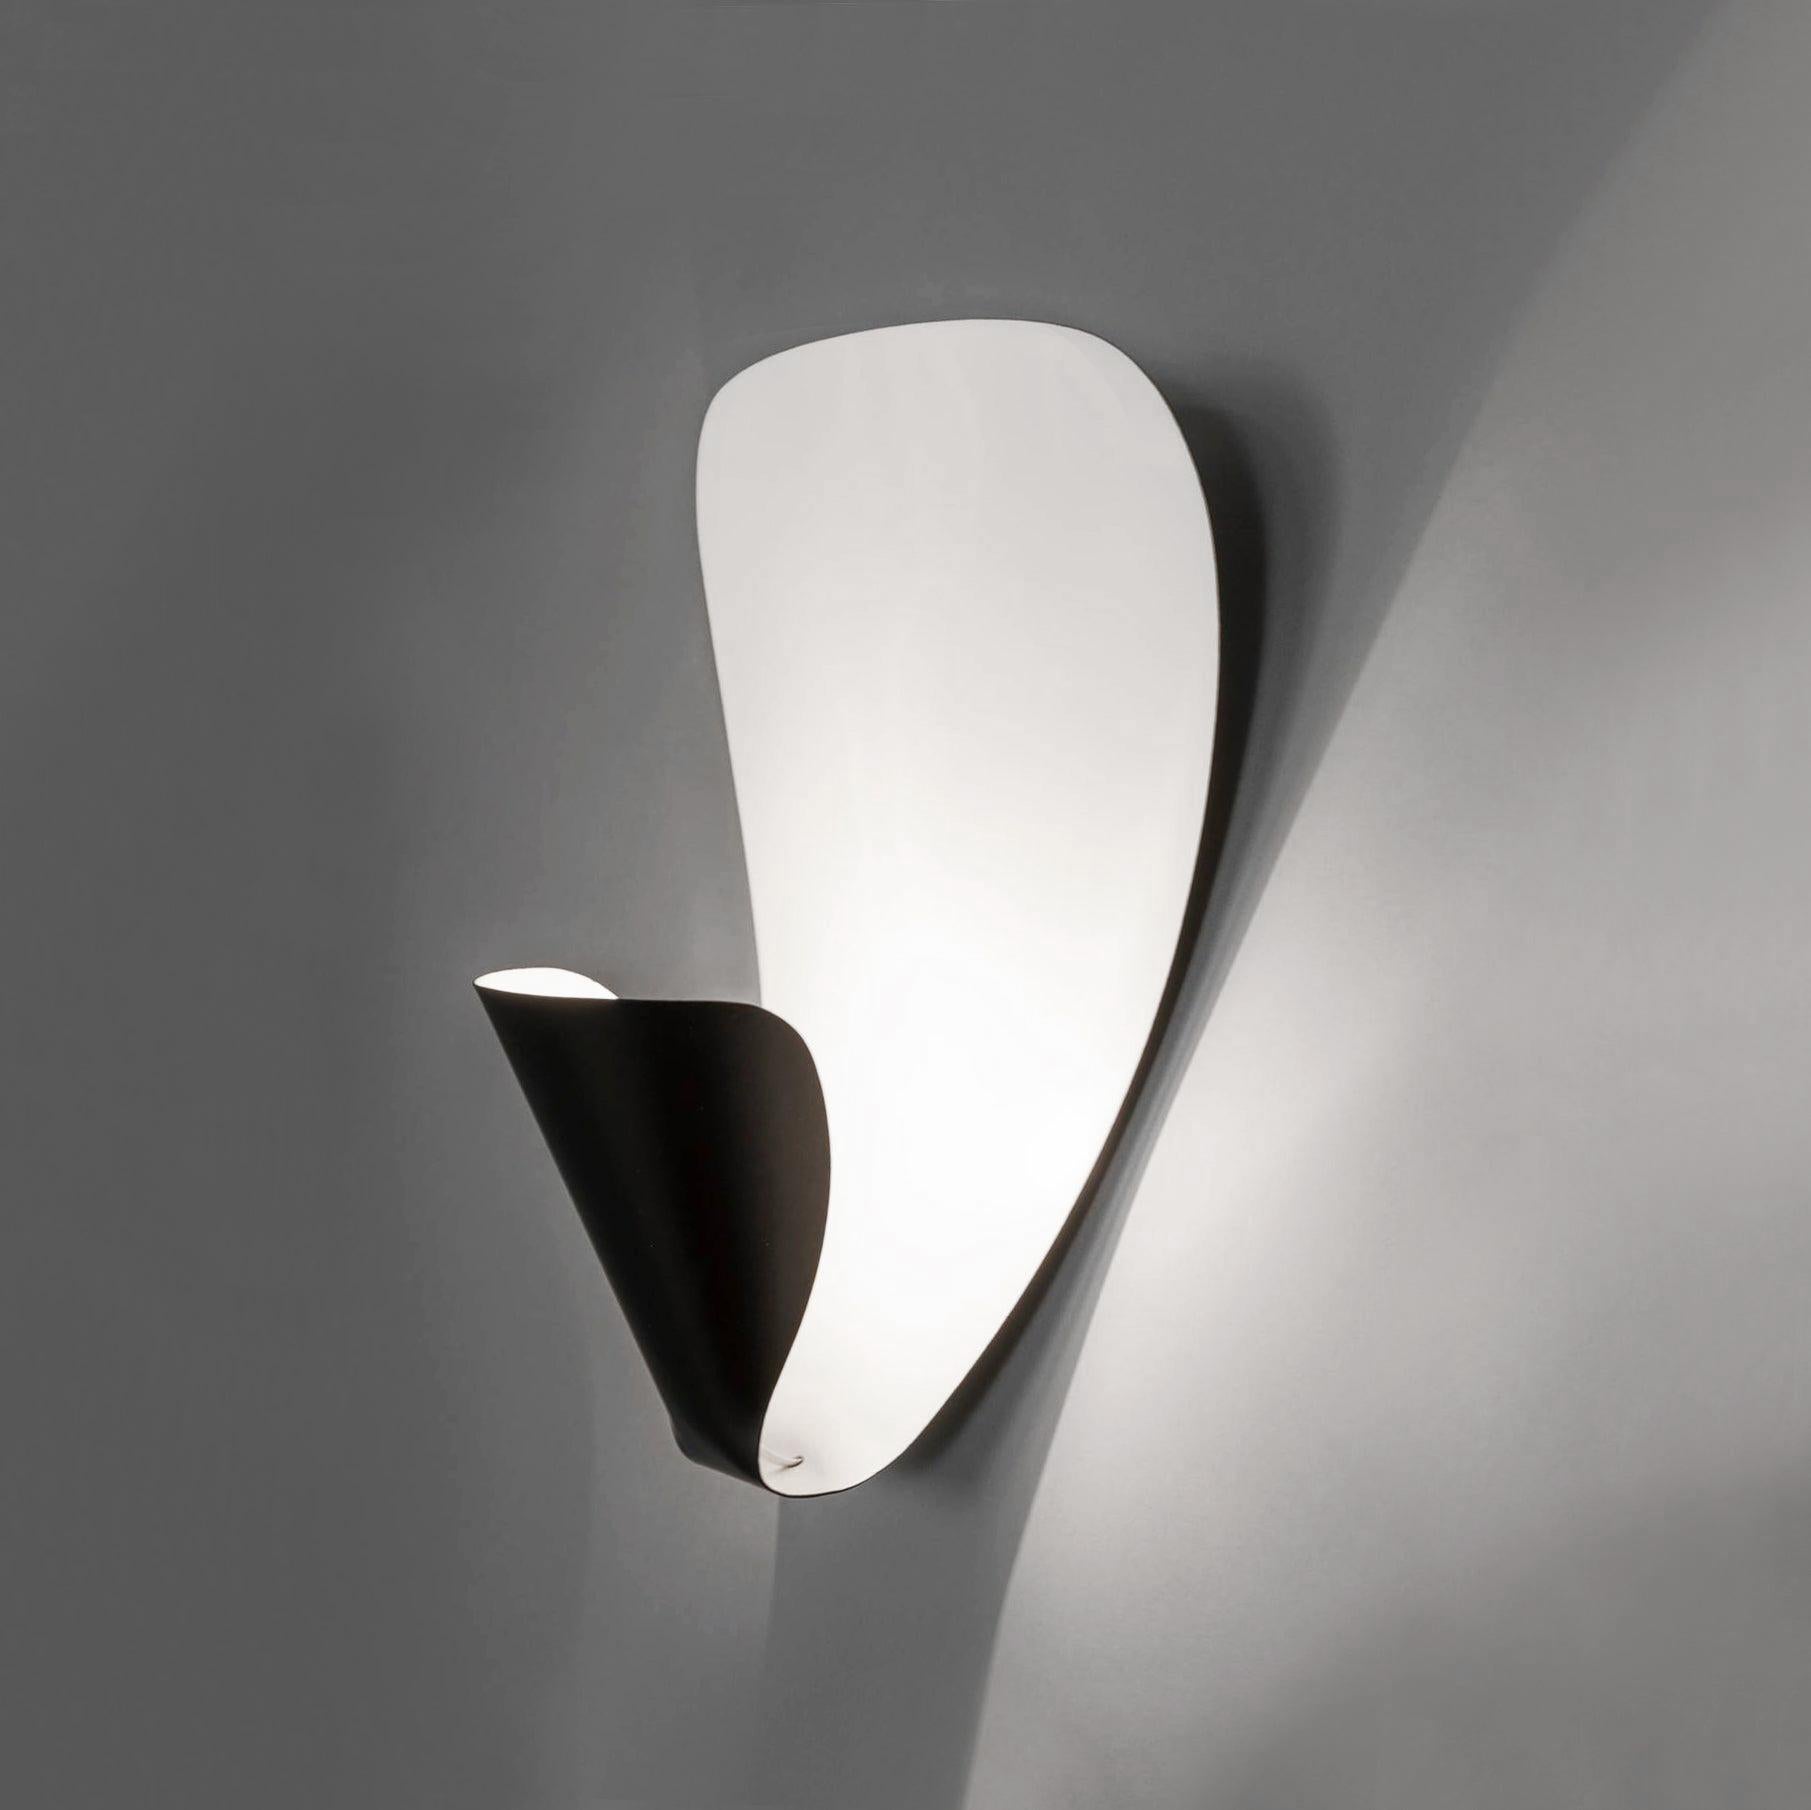 Wall Sconce Lamp model 'B206' designed by Michel Buffet in 1953.

The production of this re-edition lamps, wall lights and floor lamps are manufactured using craftsman’s techniques with the same materials and techniques as the first models. Each